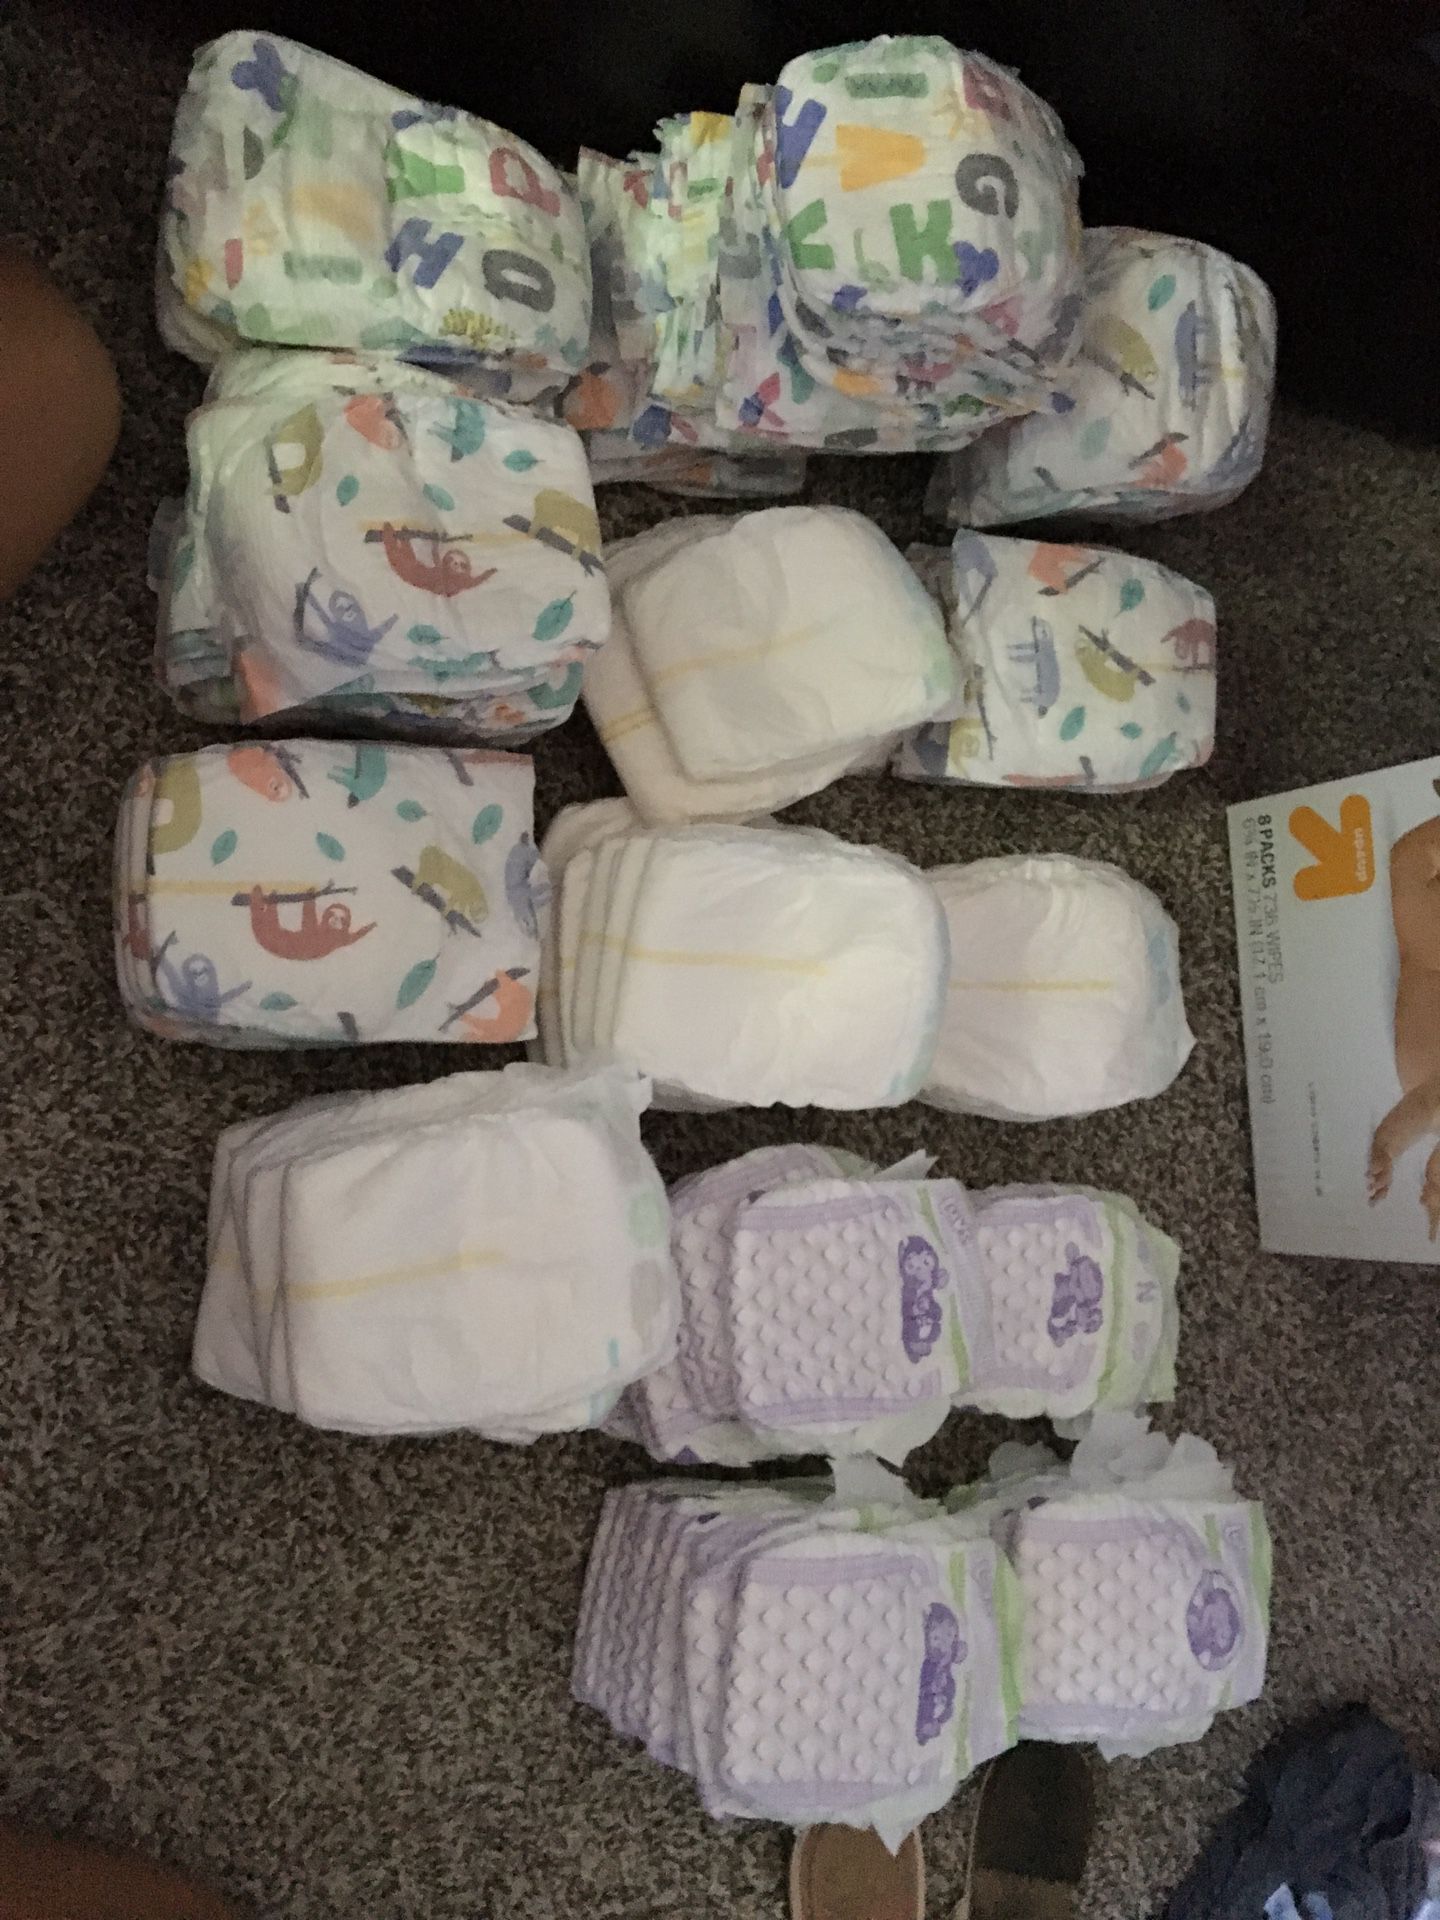 125 diapers size newborn & size 1